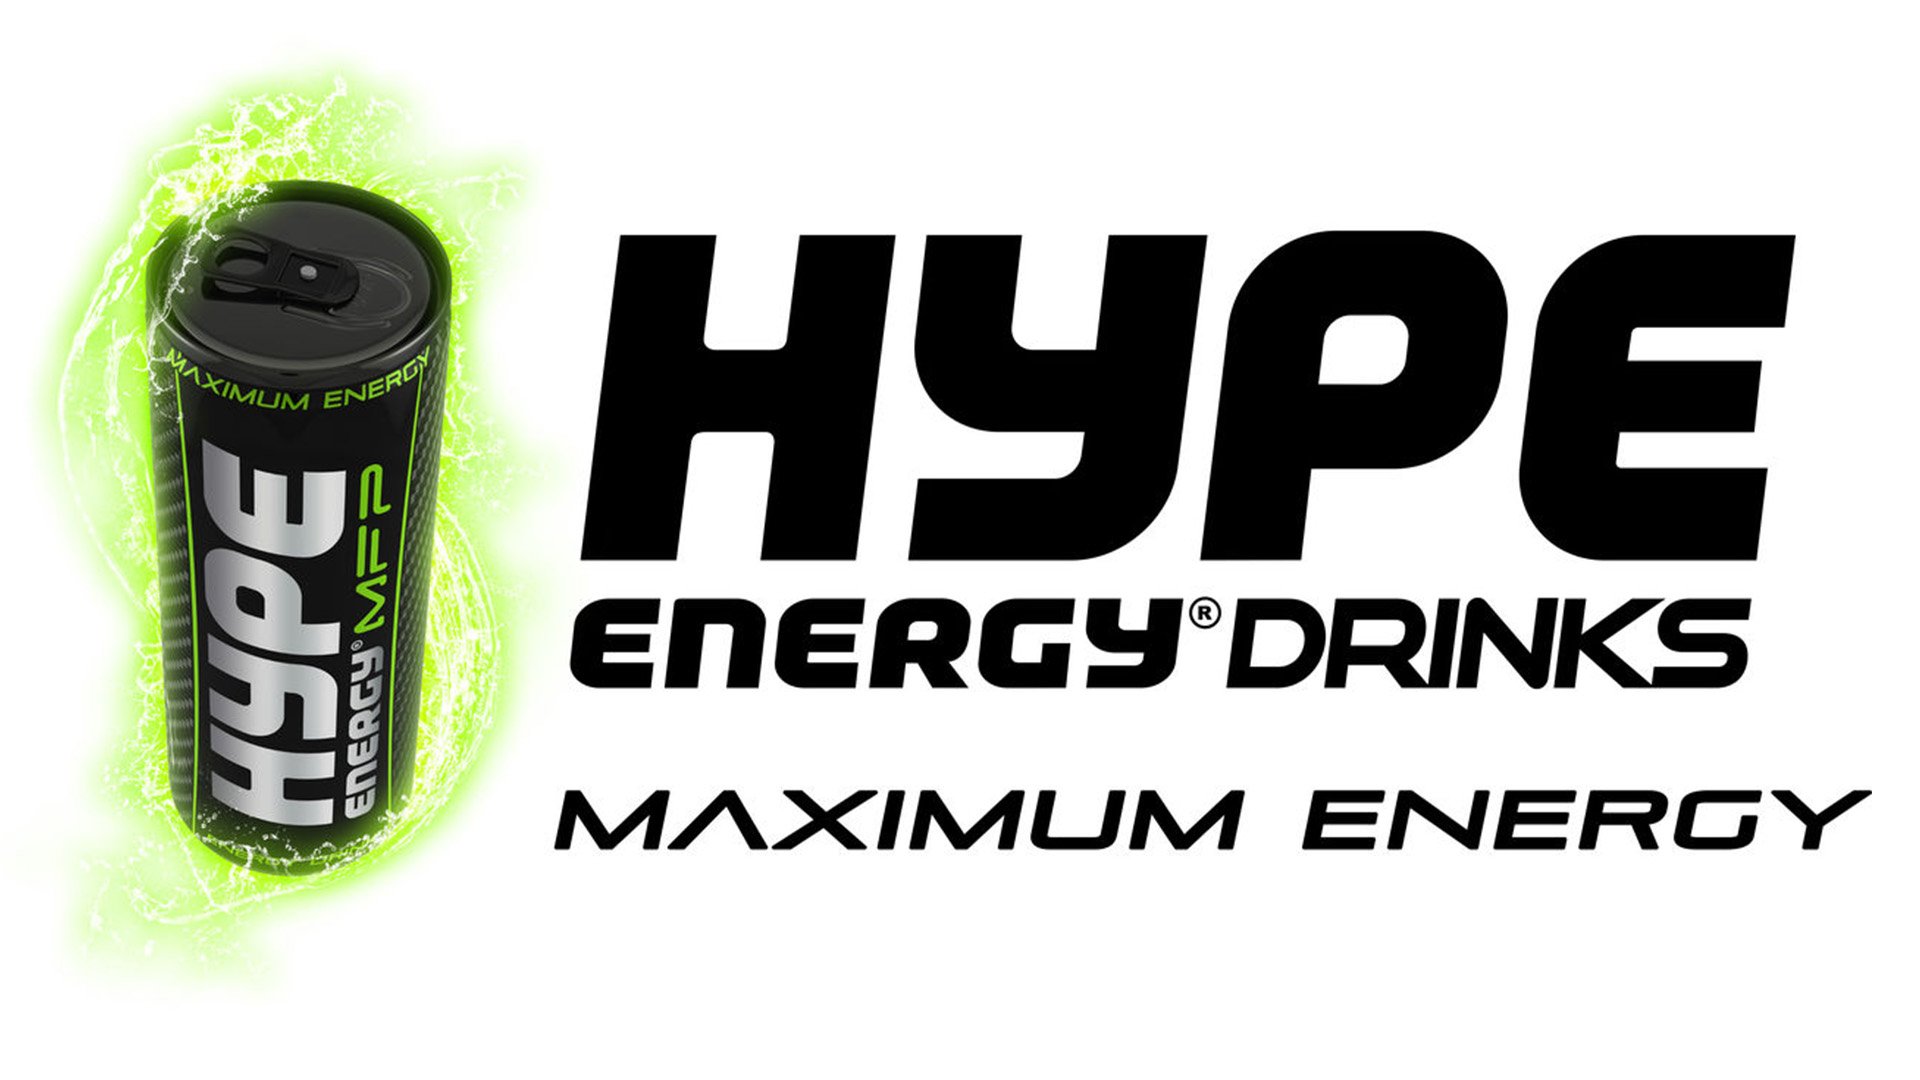 energy drink logos and names